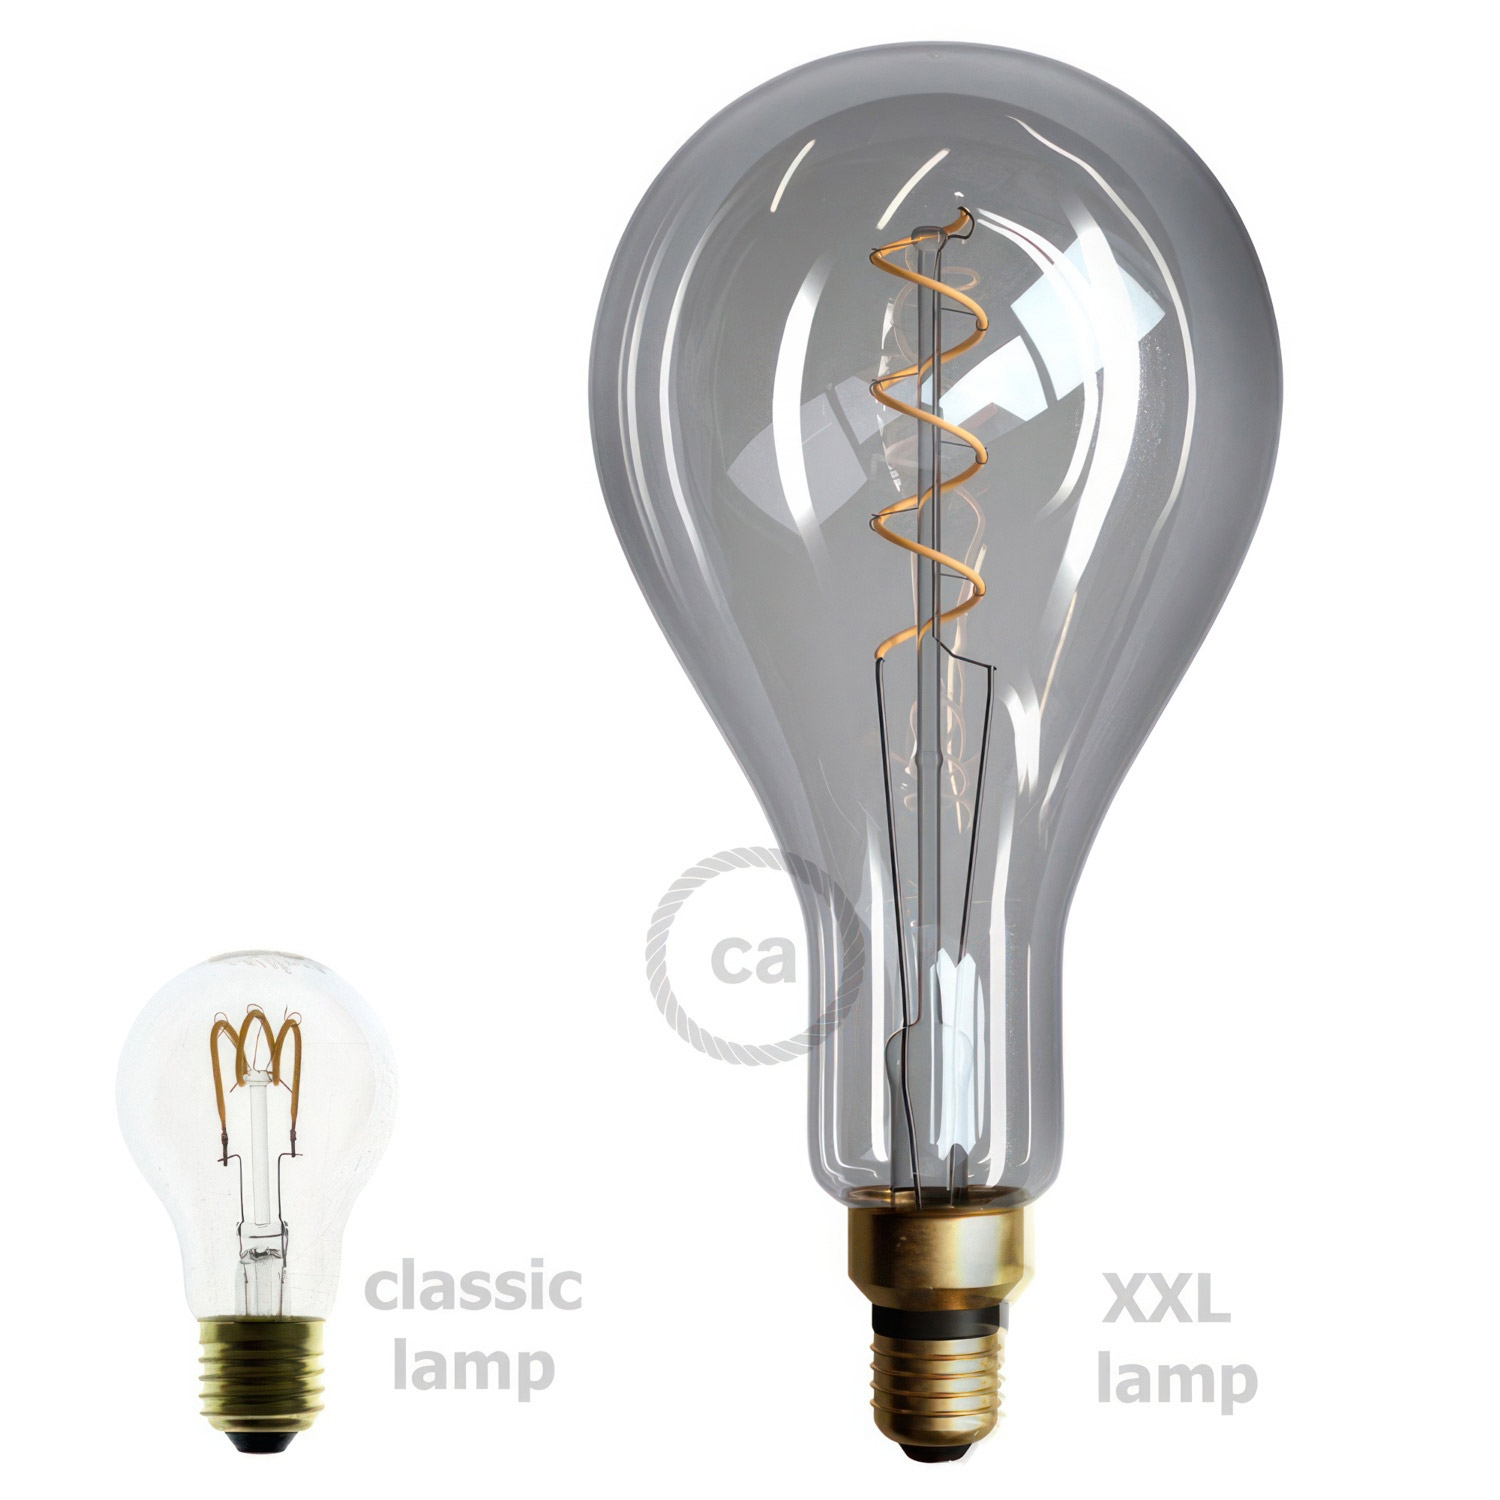 XXL LED Smoky Light Bulb - Pear A165 Curved Double Spiral Filament - 5W E27 Dimmable 2000K